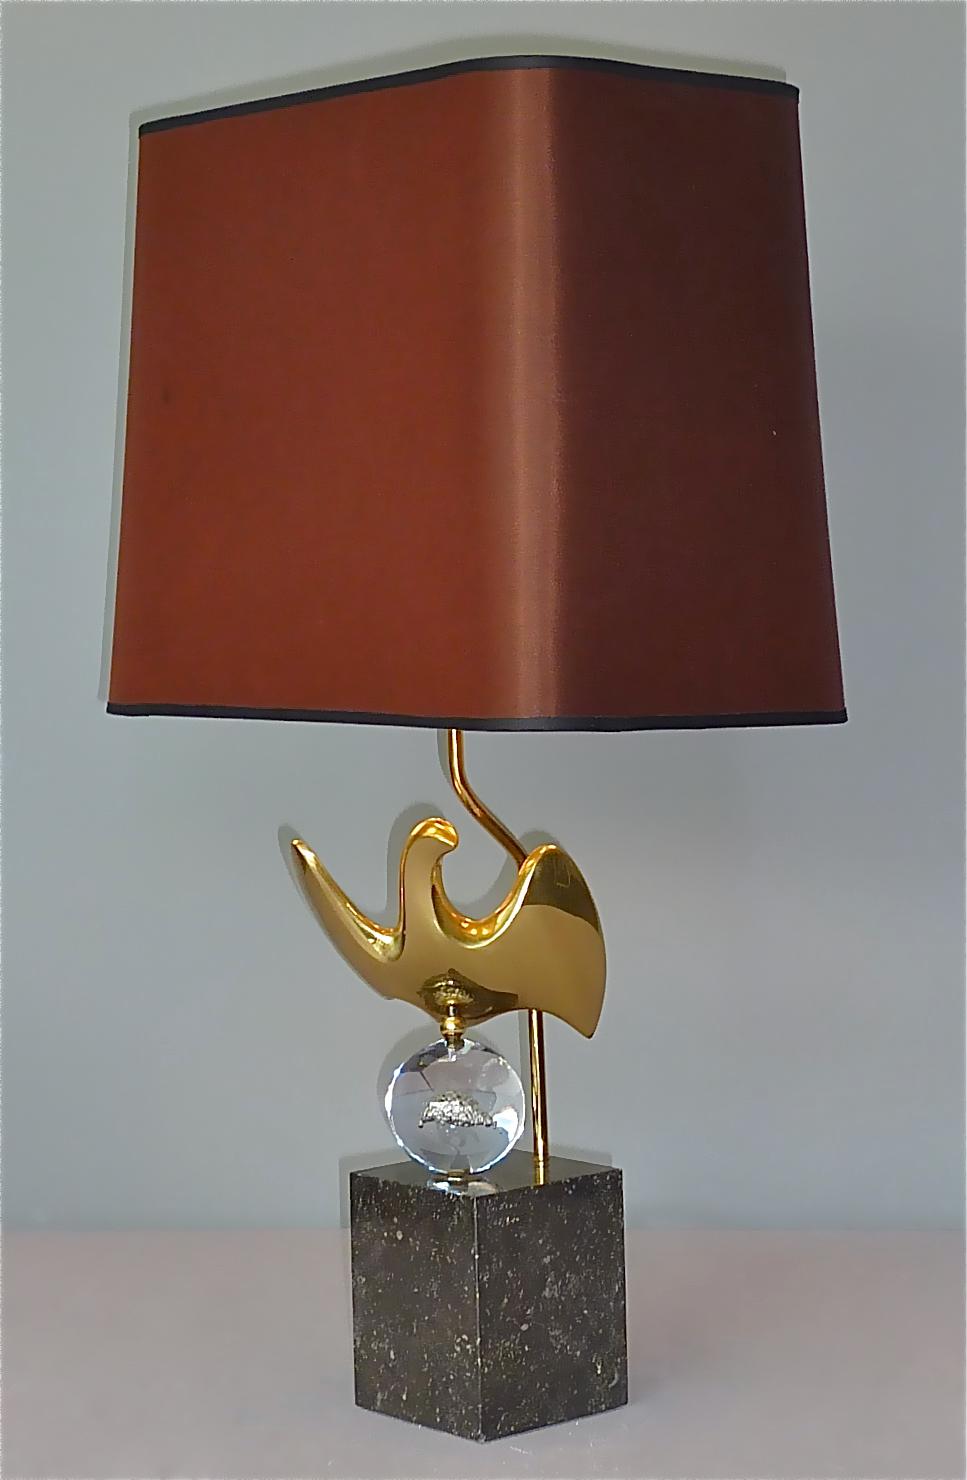 Superb and very rare sculptural French abstract bird table lamp by artist Philippe Jean, France around 1970s. The table lamp has a square heavy black-grey granite base signed Ph. Jean and 107/300, so from a limited edition, a crystal glass globe